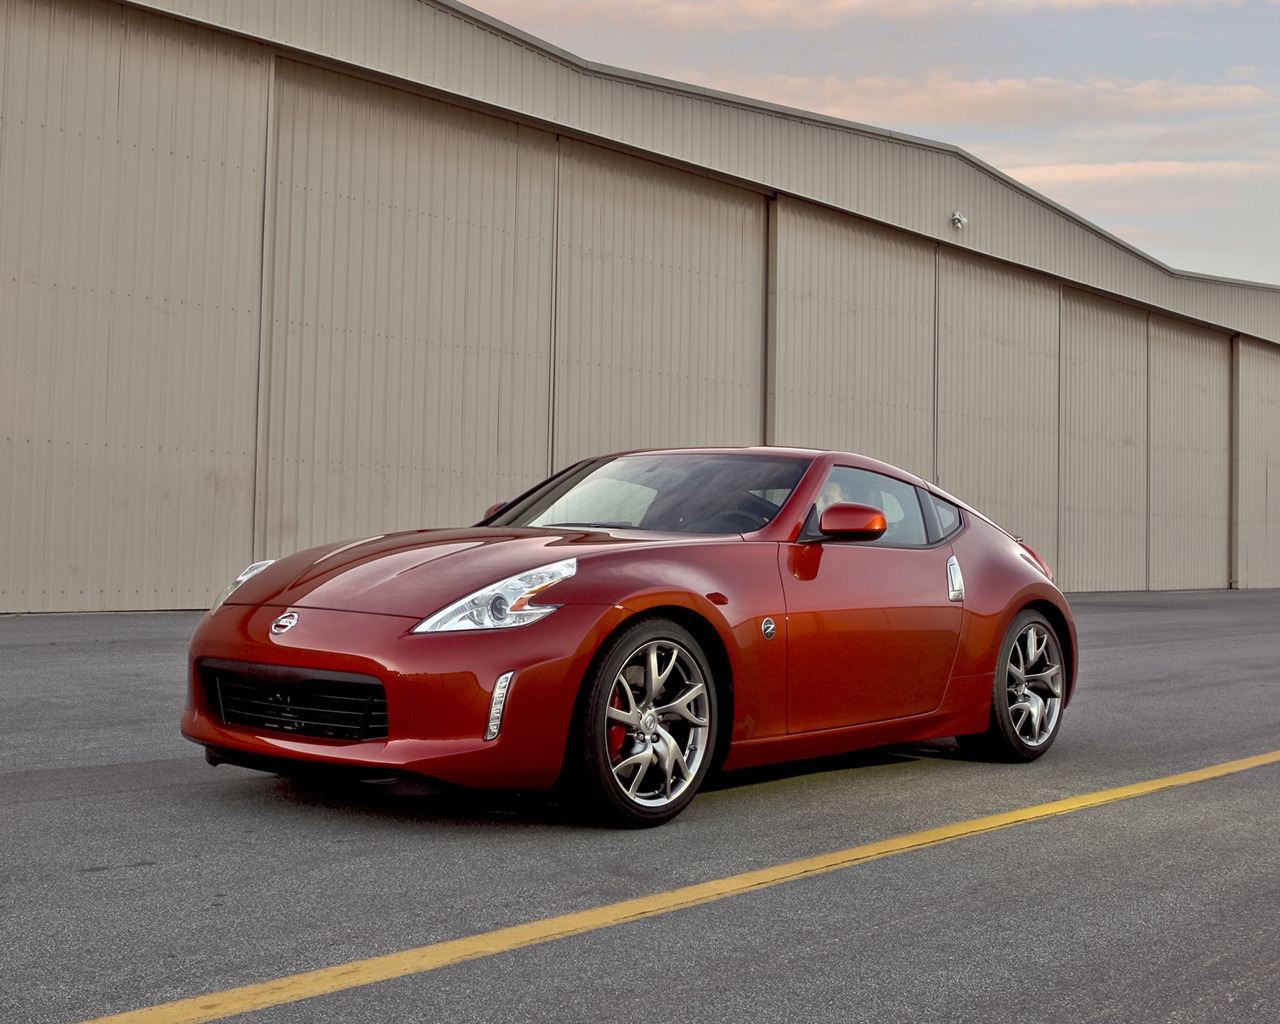 2013 Nissan 370Z Magma Red for 1280 x 1024 resolution